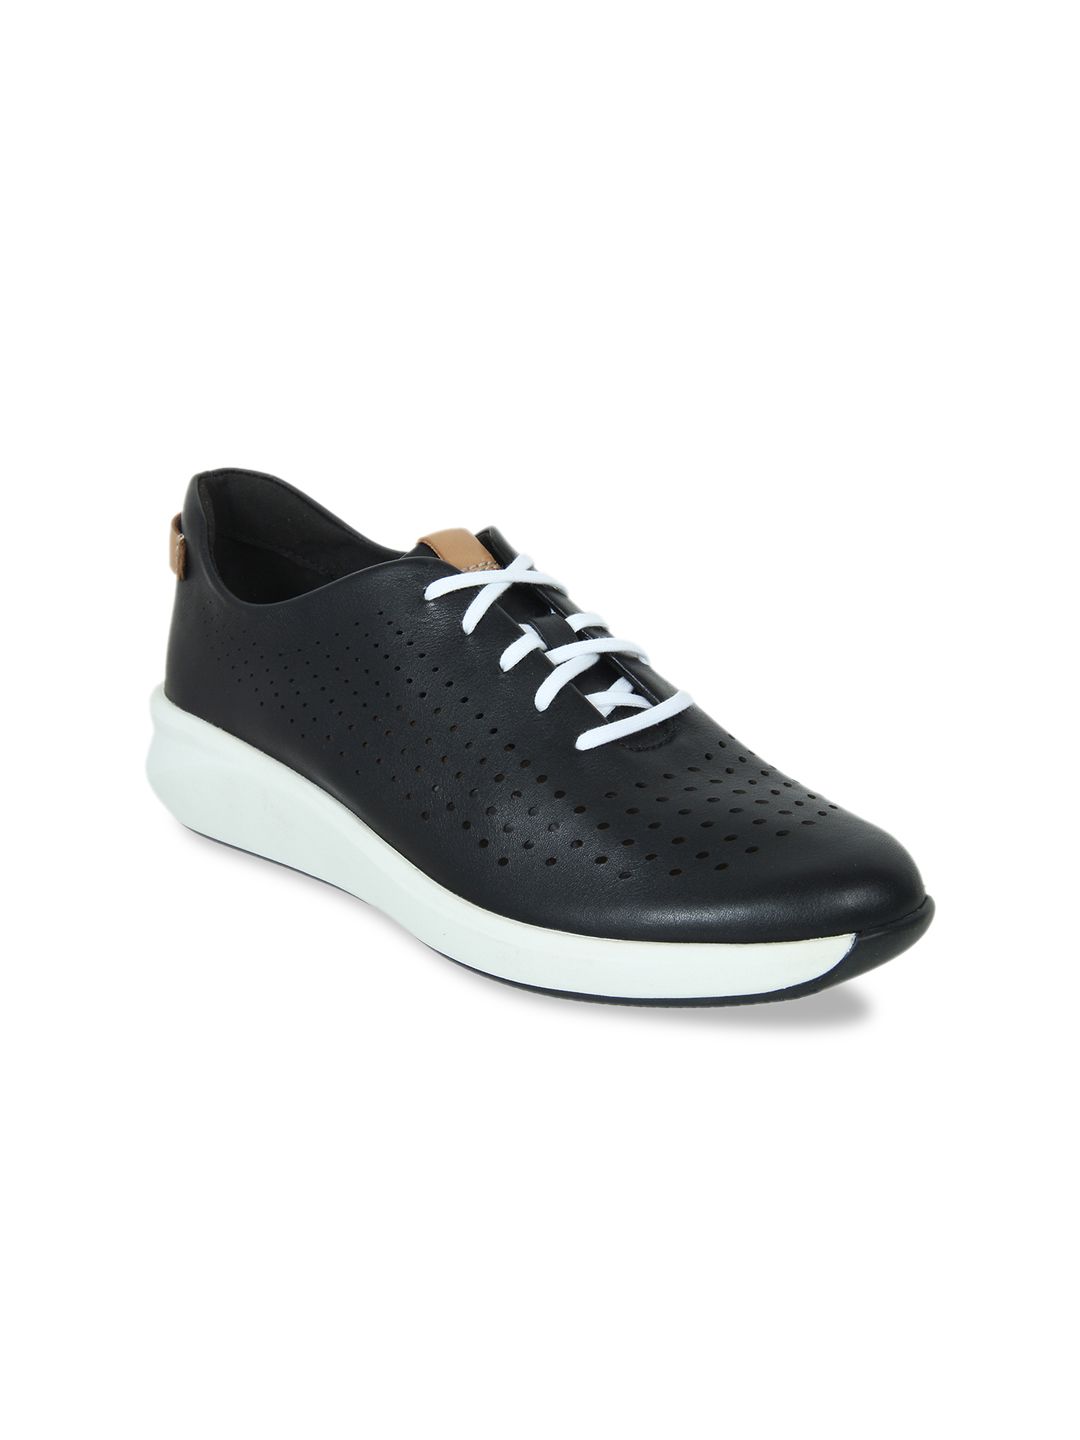 Clarks Women Black Leather Laser Cut Casual Shoes Price in India